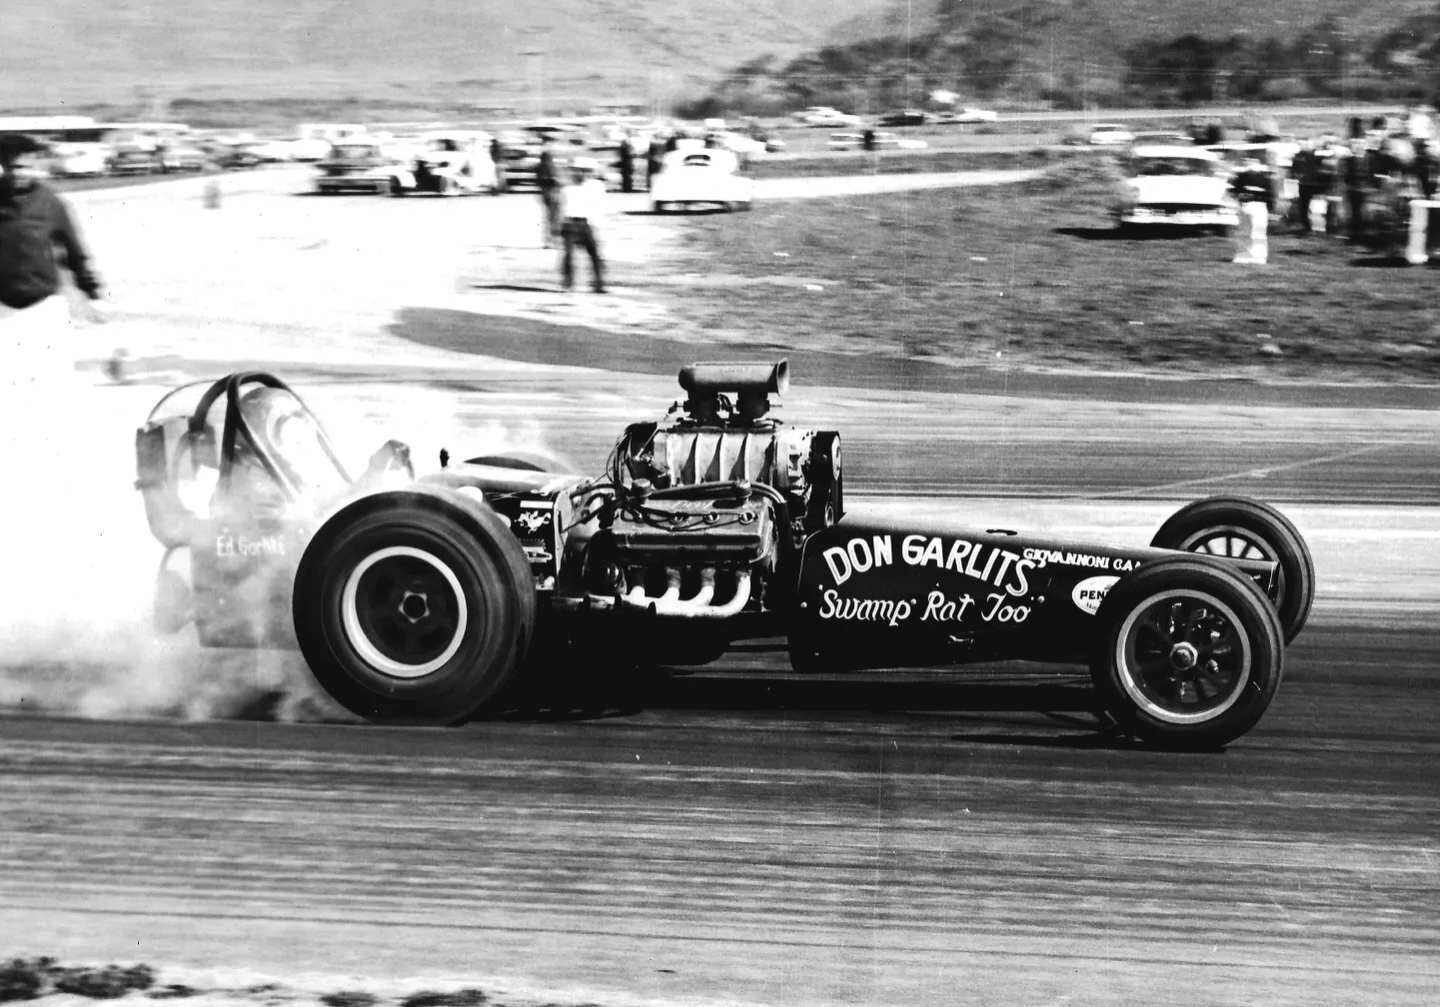 A black and white photo of a drag car with smoke billowing out of it during a thrilling drag race.